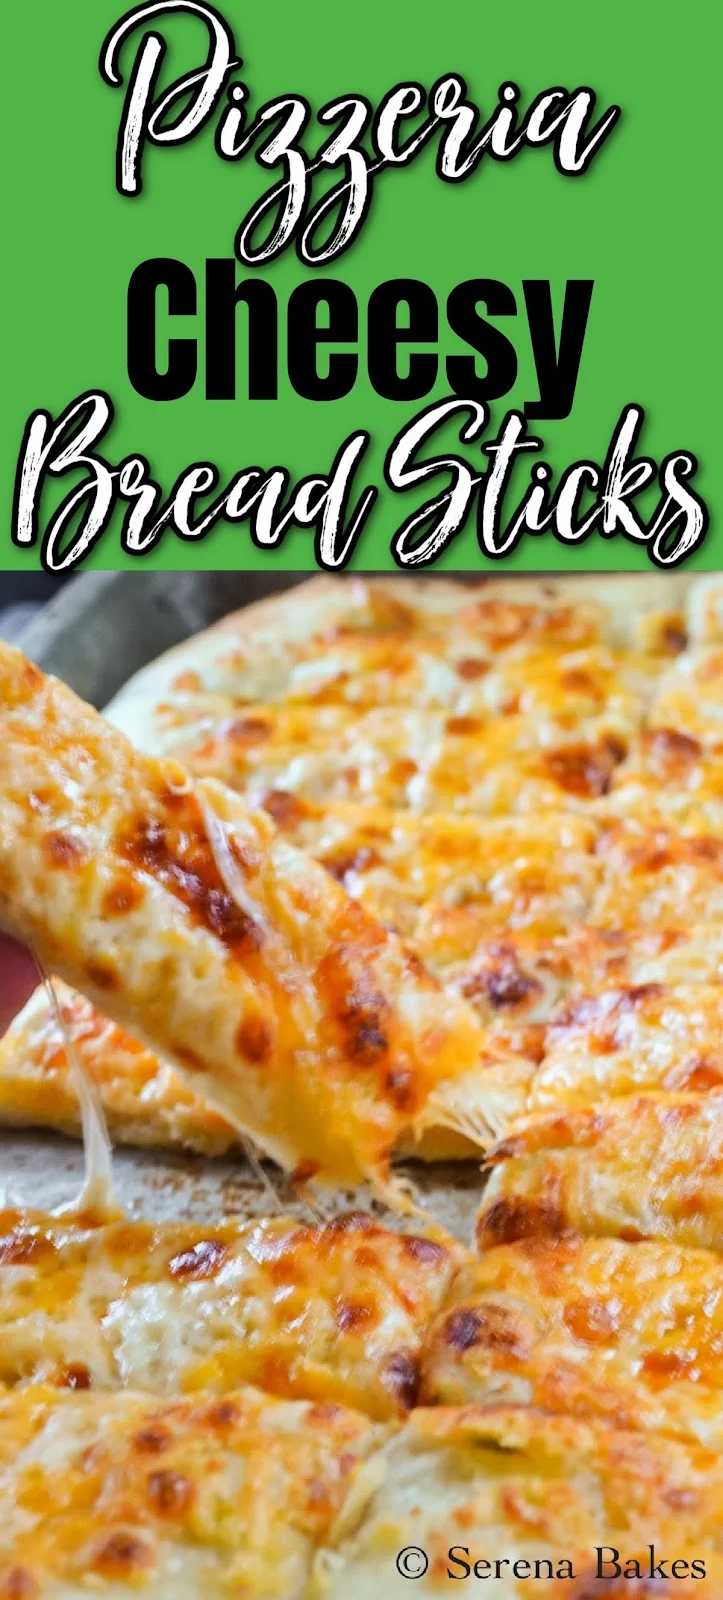 A hand pulling a Cheesy Breadstick with a green banner at the top with text Pizzeria Cheesy Breadsticks.